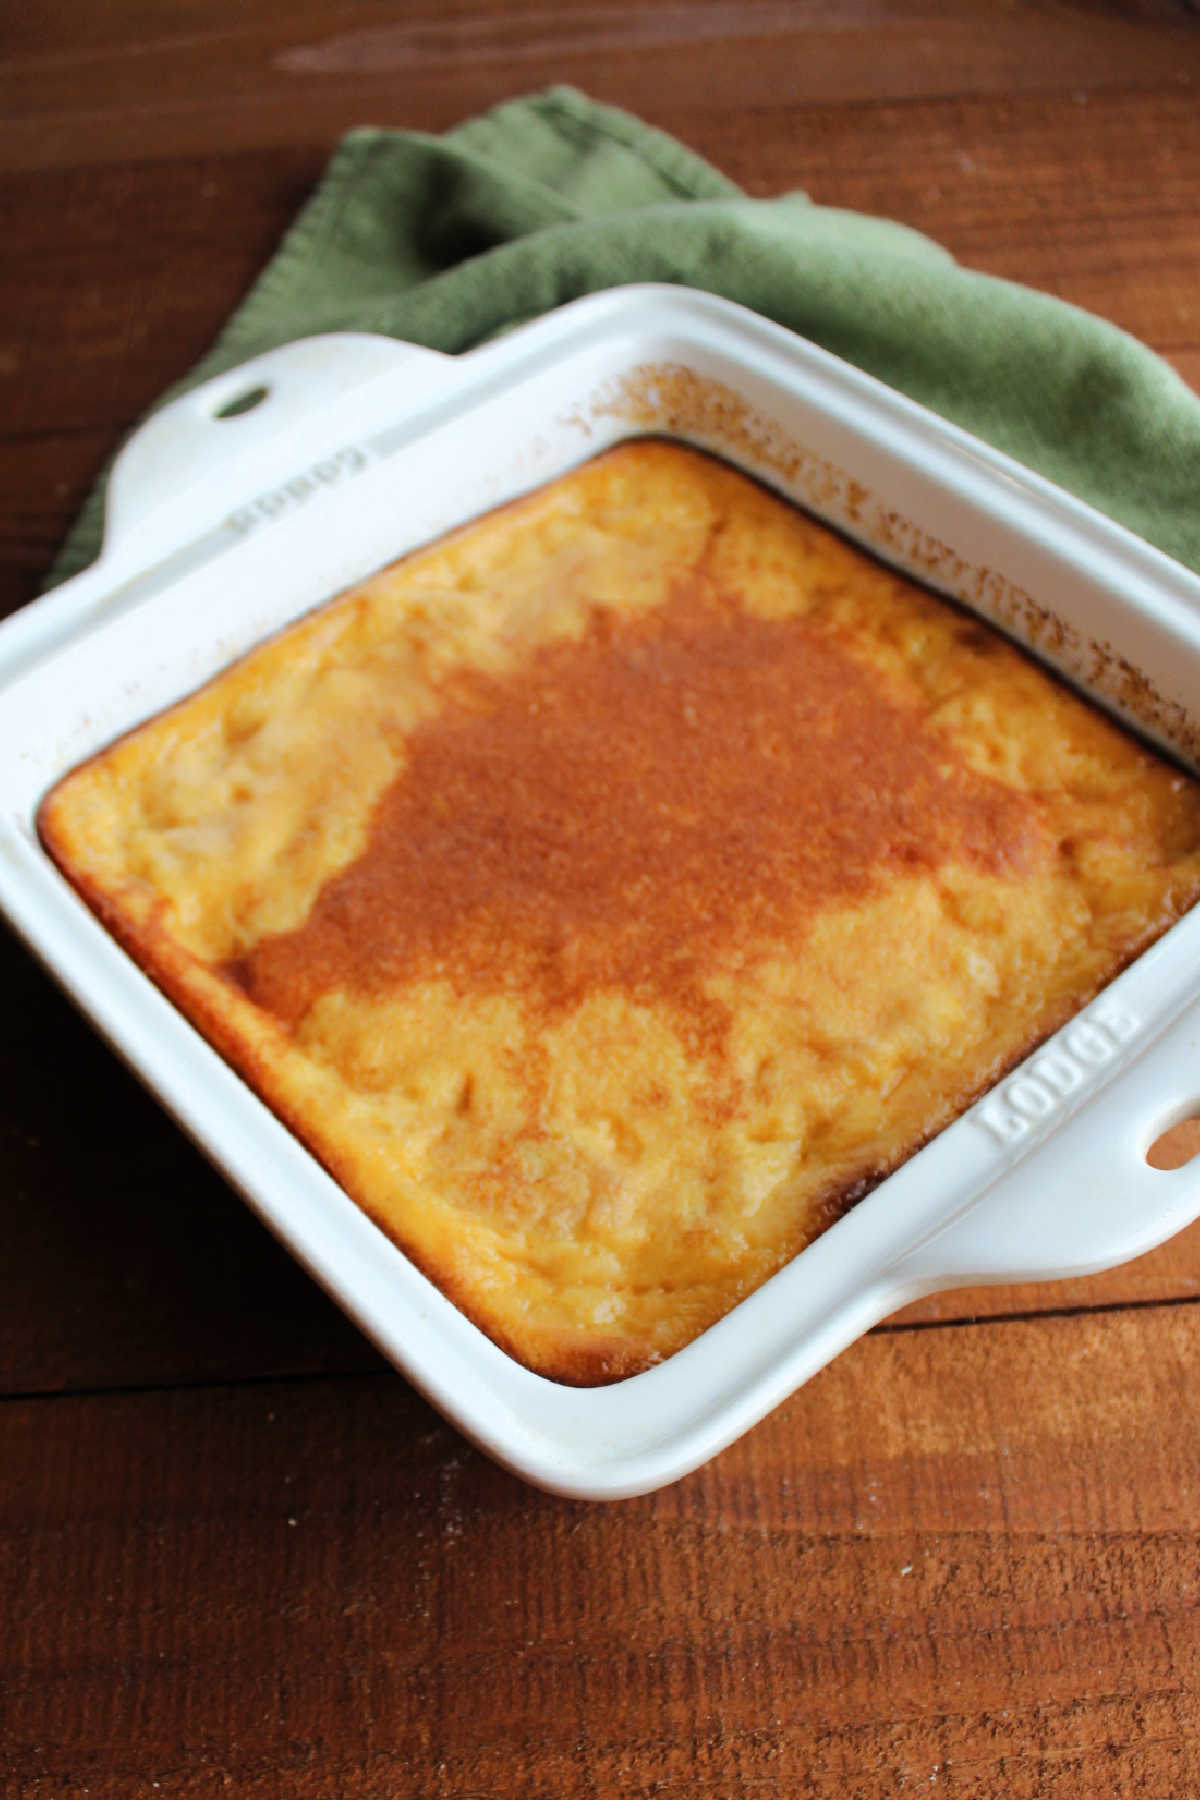 Pan of freshly baked rice pudding with layer of cinnamon on top.